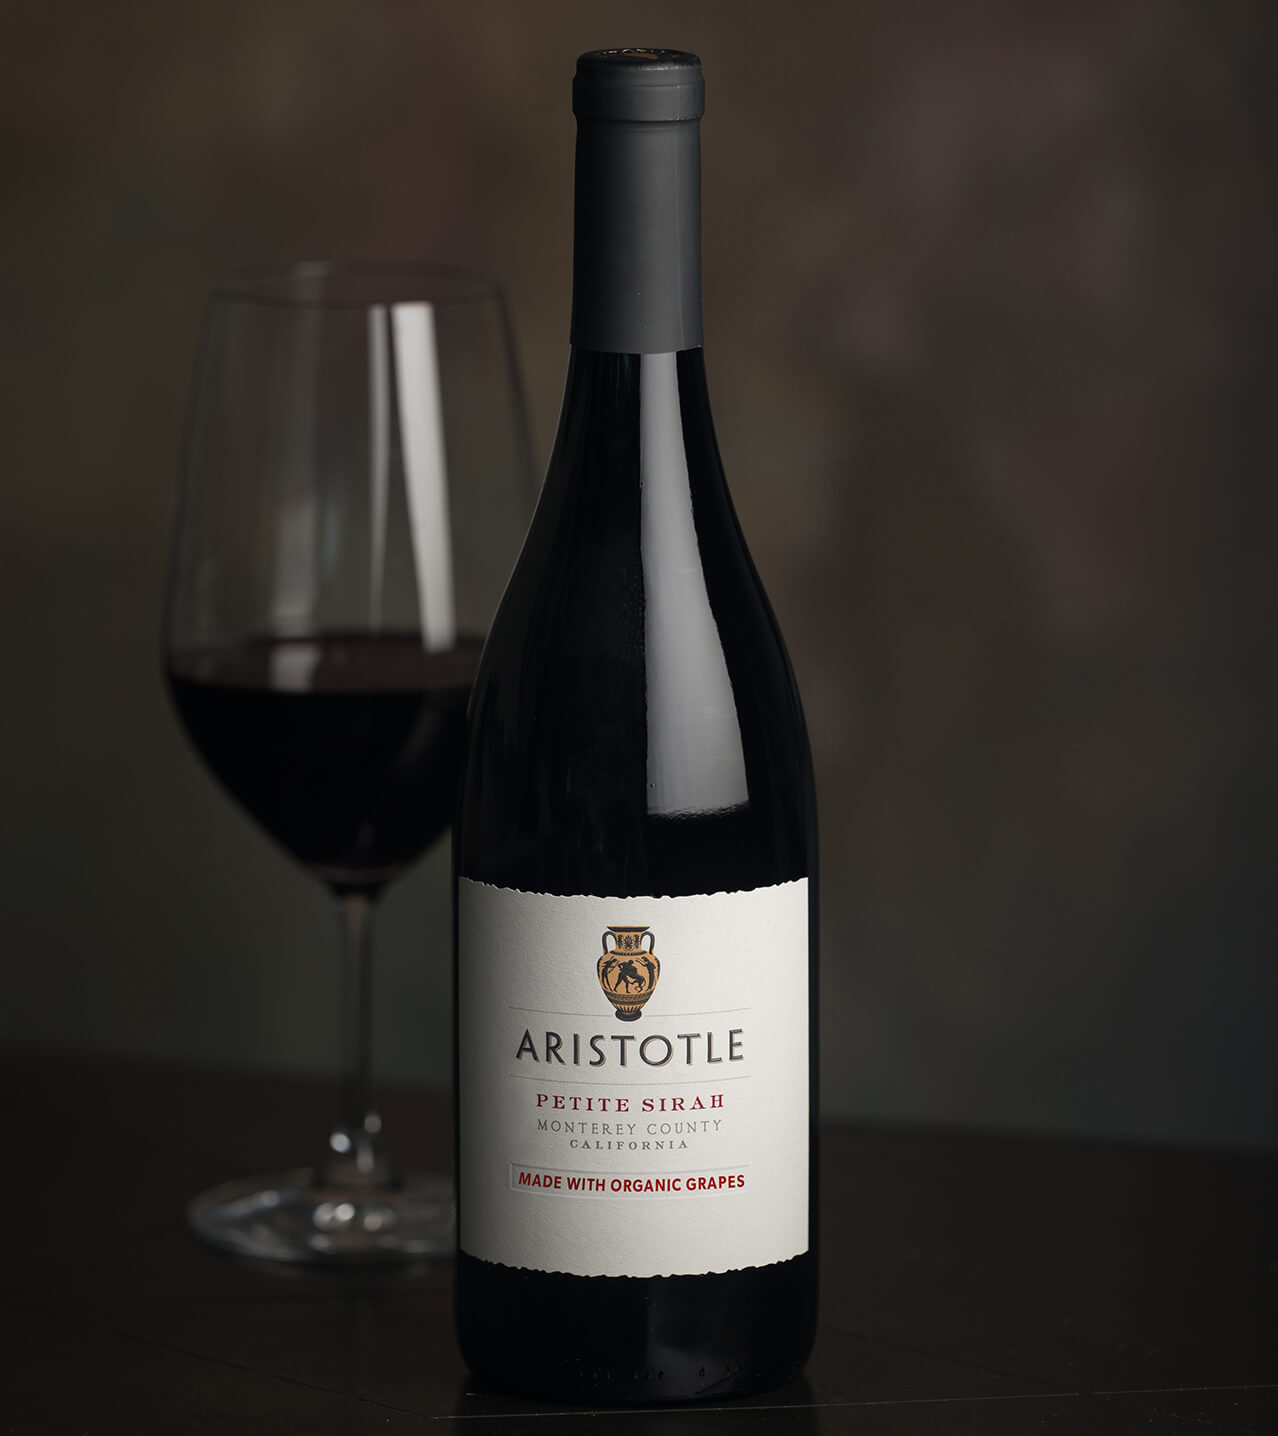 Aristotle Wine bottle and glass